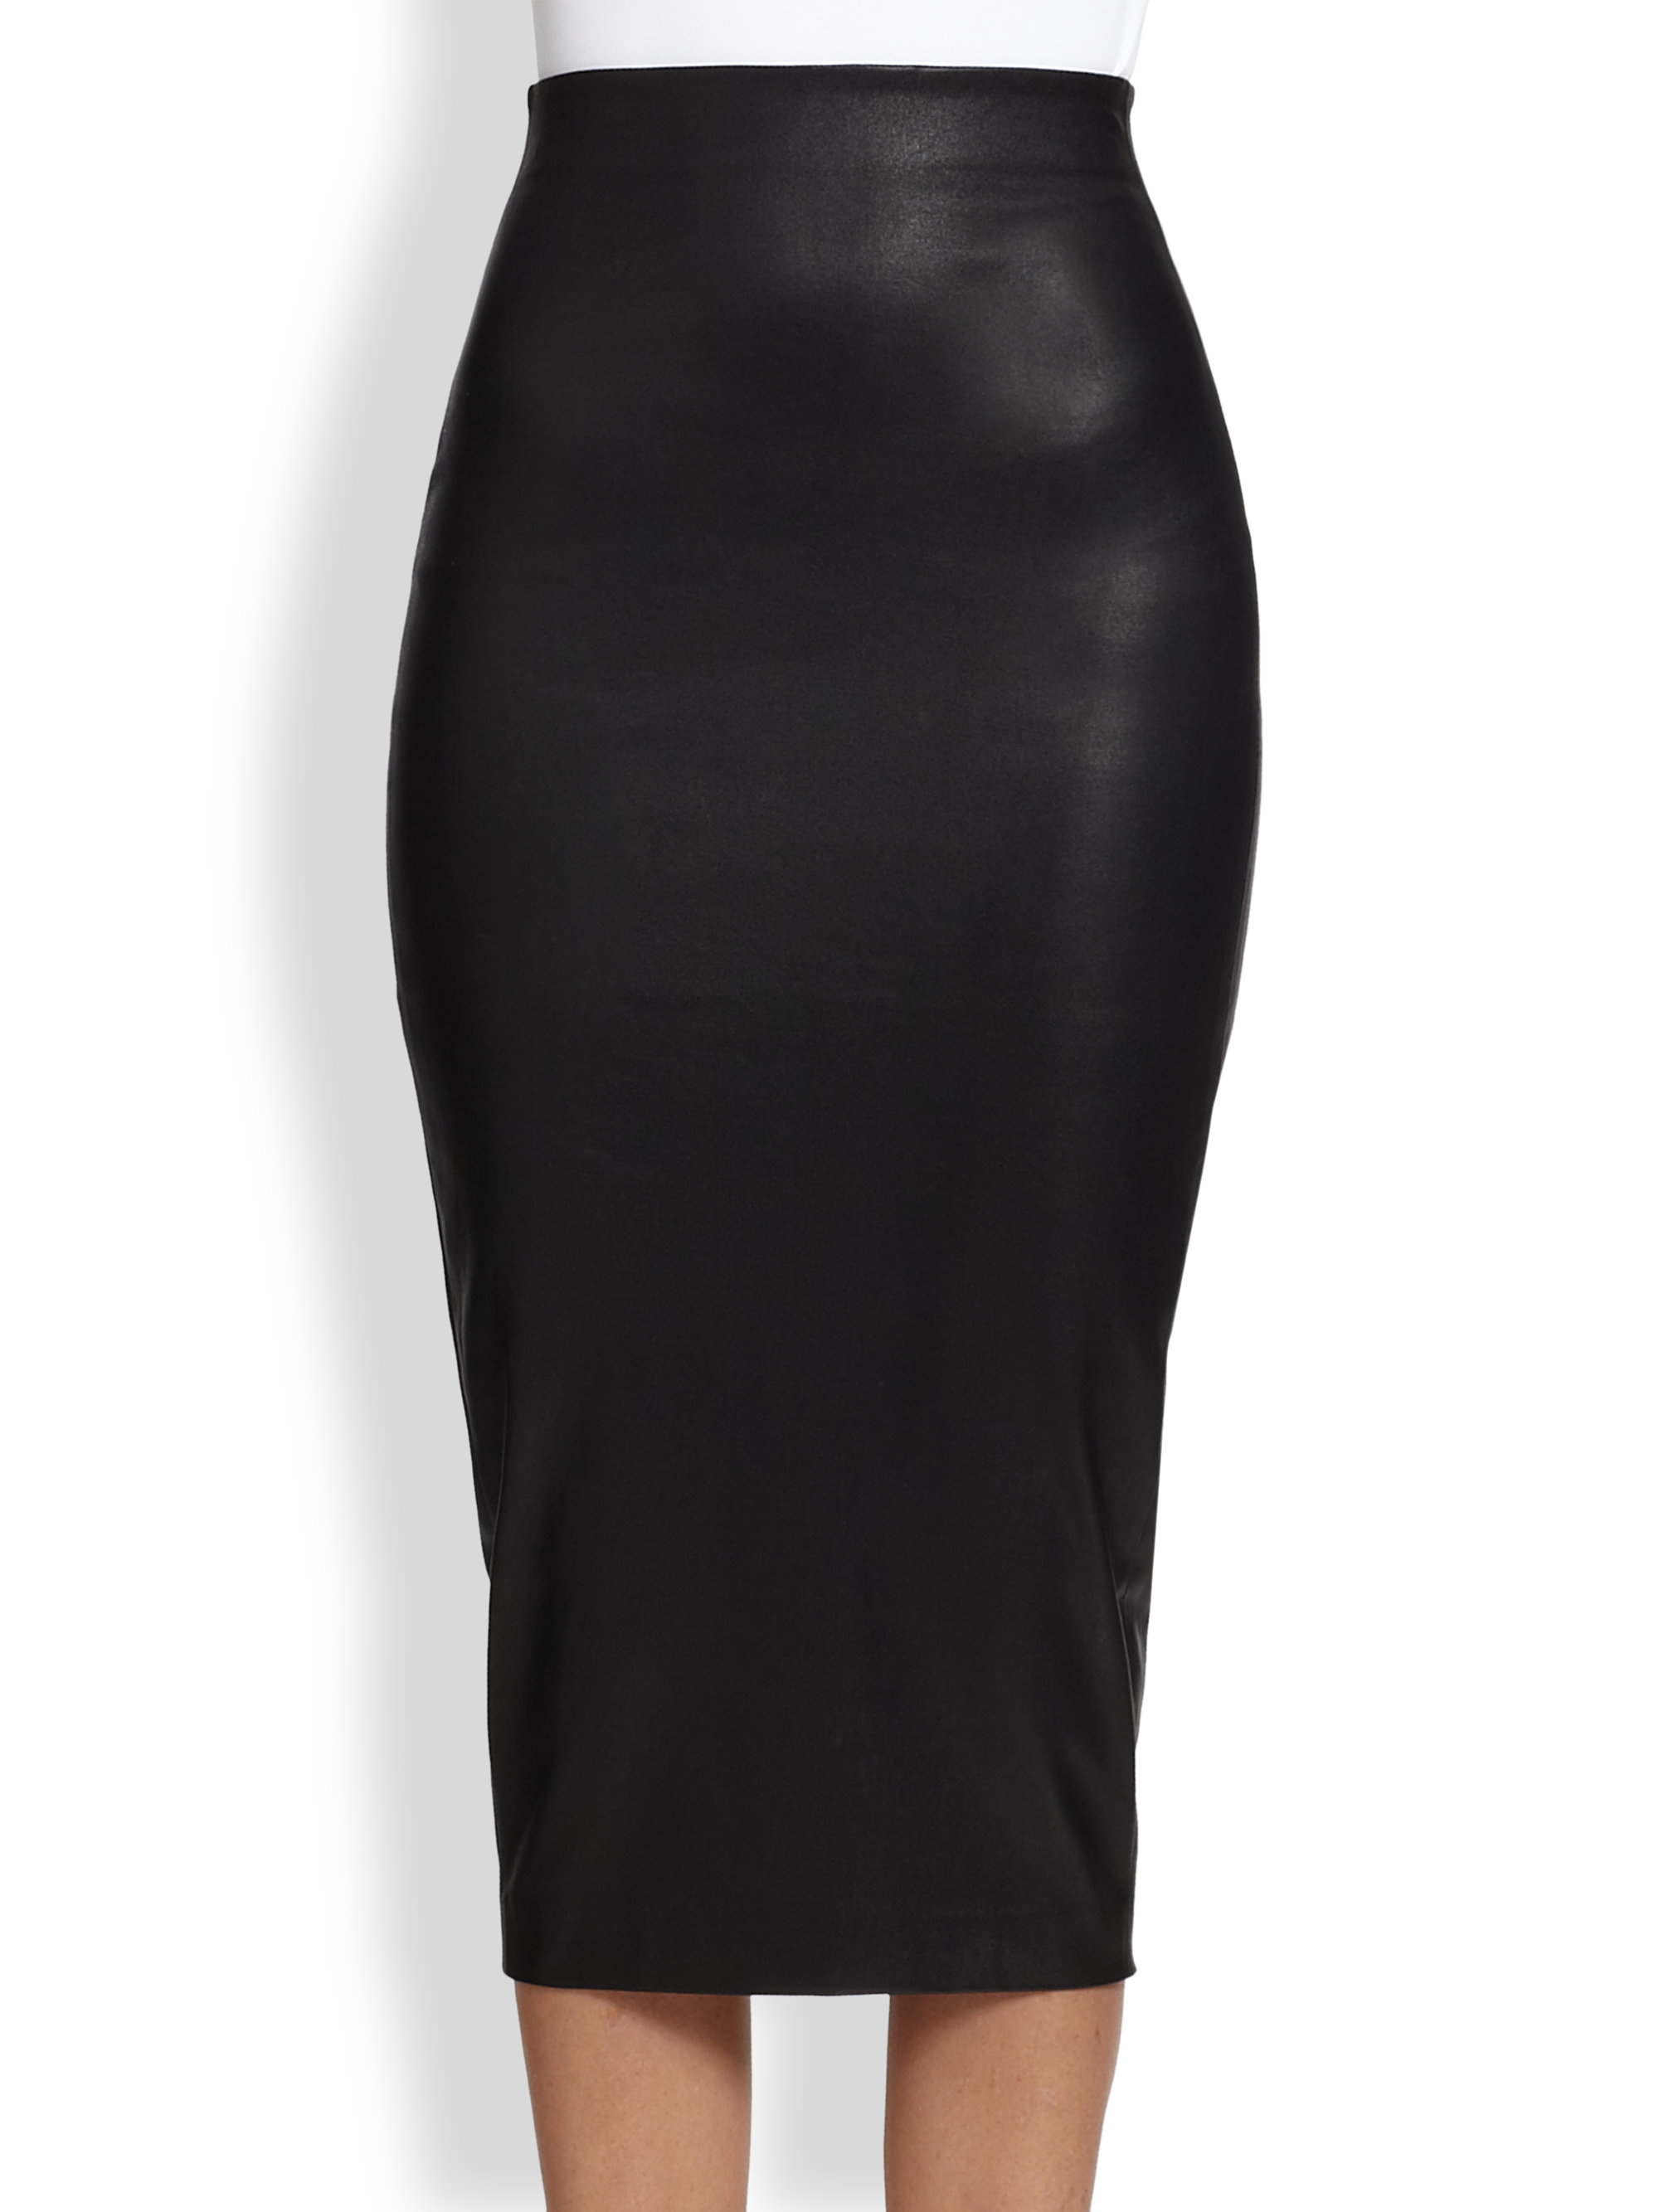 Robert rodriguez Stretch Leather Pencil Skirt in Black | Lyst